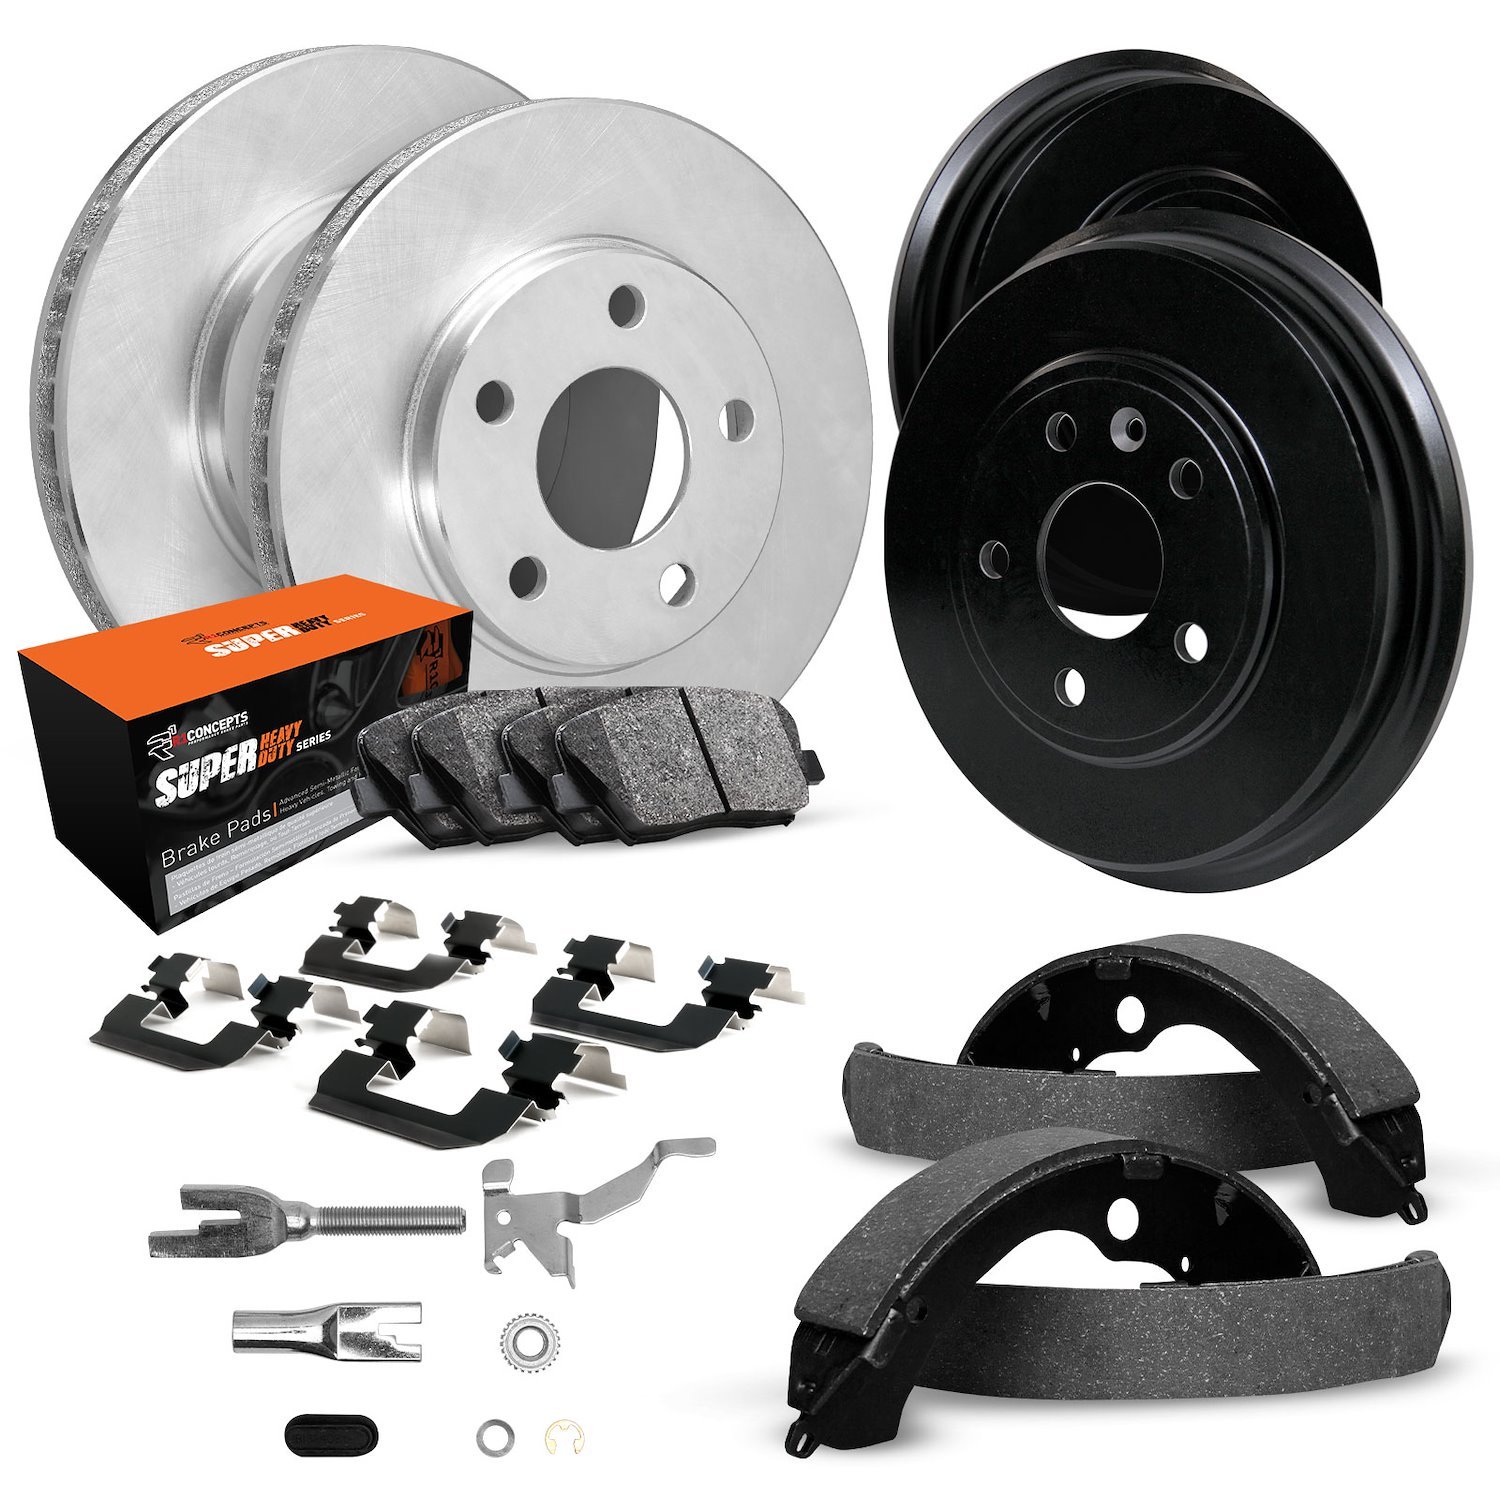 E-Line Blank Brake Rotor & Drum Set w/Super-Duty Pads, Shoes, Hardware, & Adjusters, 1981-1987 GM, Position: Front & Rear